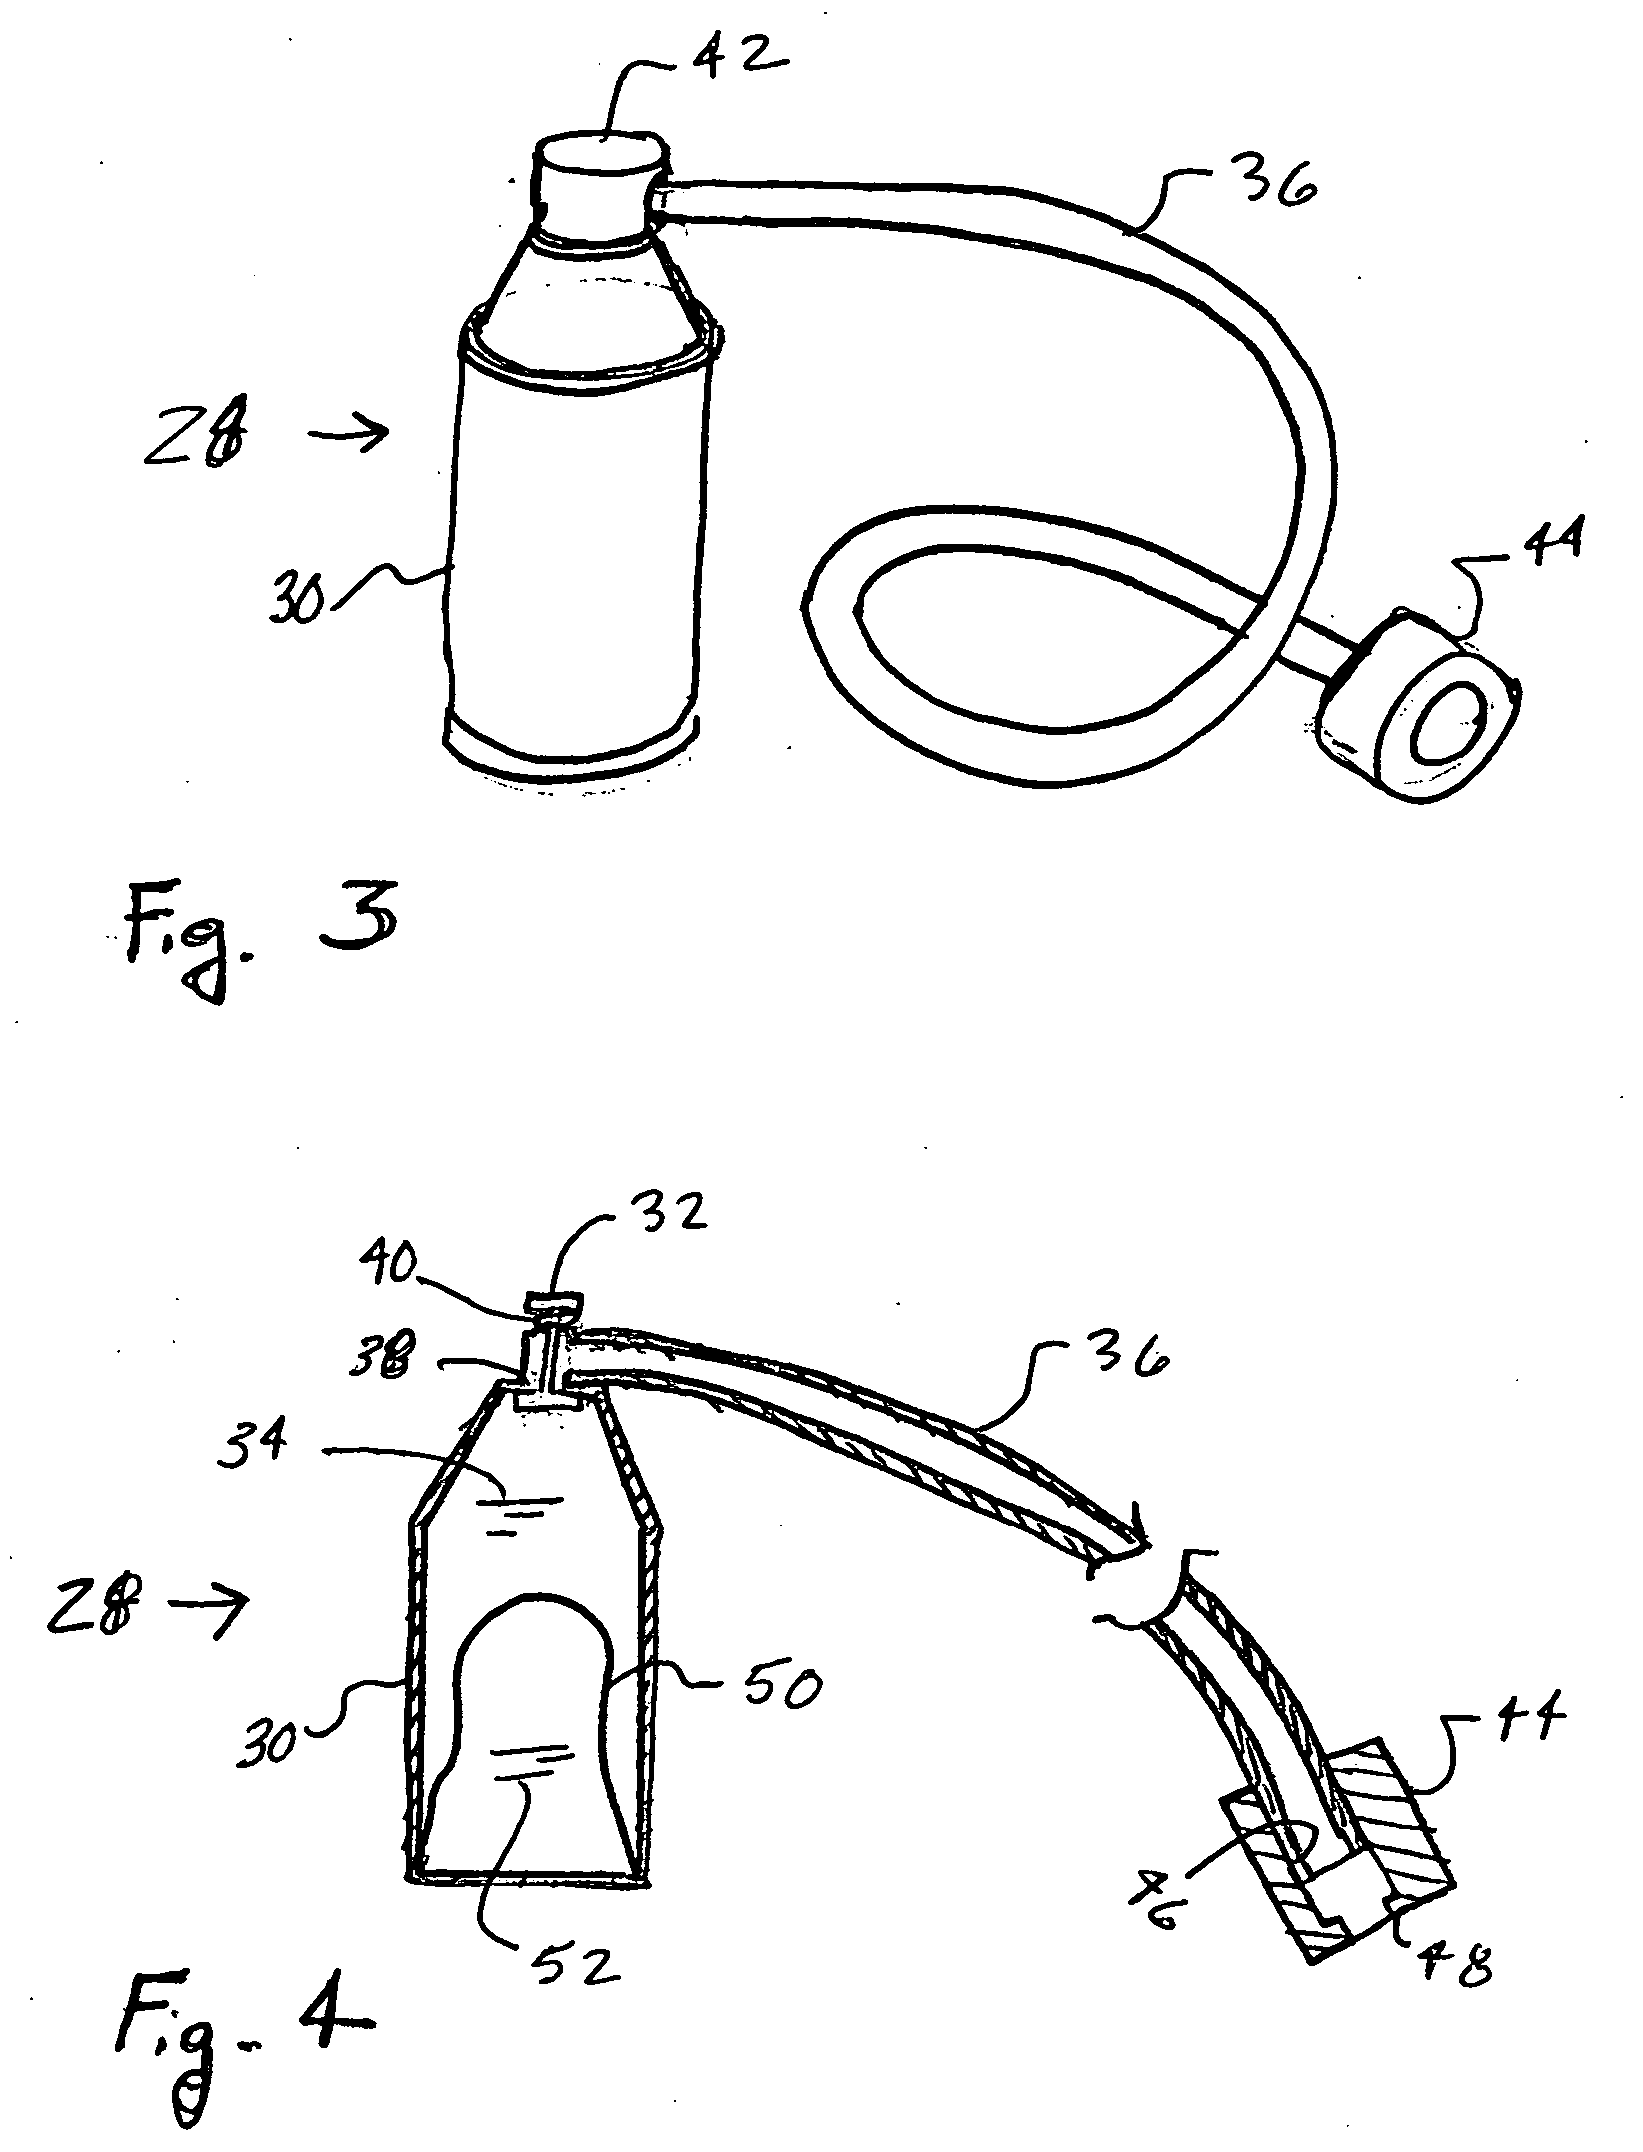 Apparatus and method for bleeding motor vehicle hydraulic systems